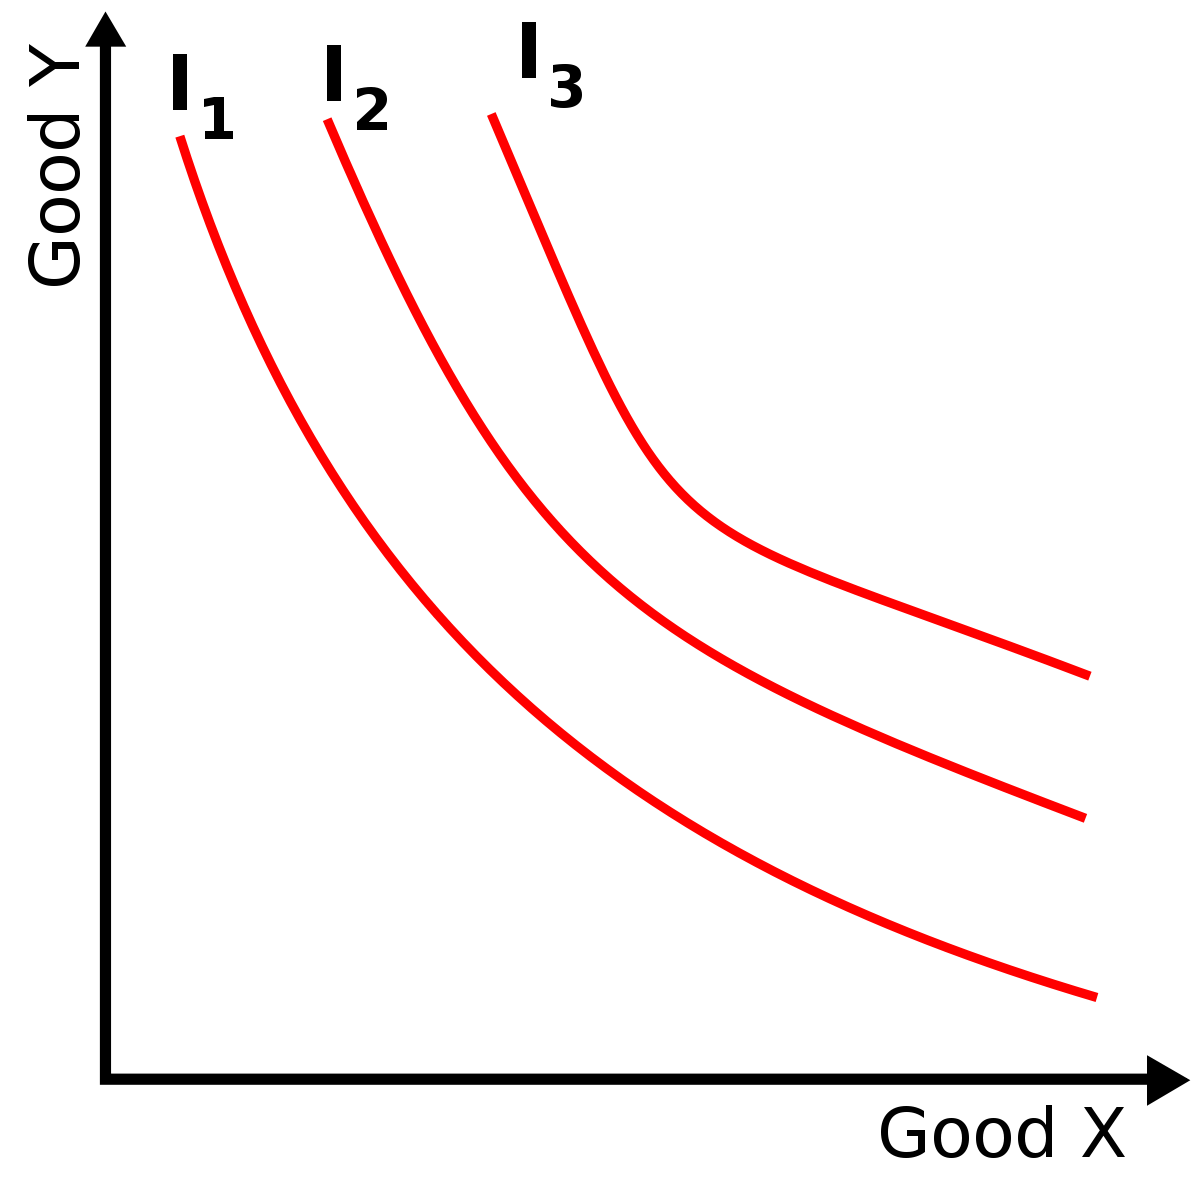 Indifference curve - Wikipedia